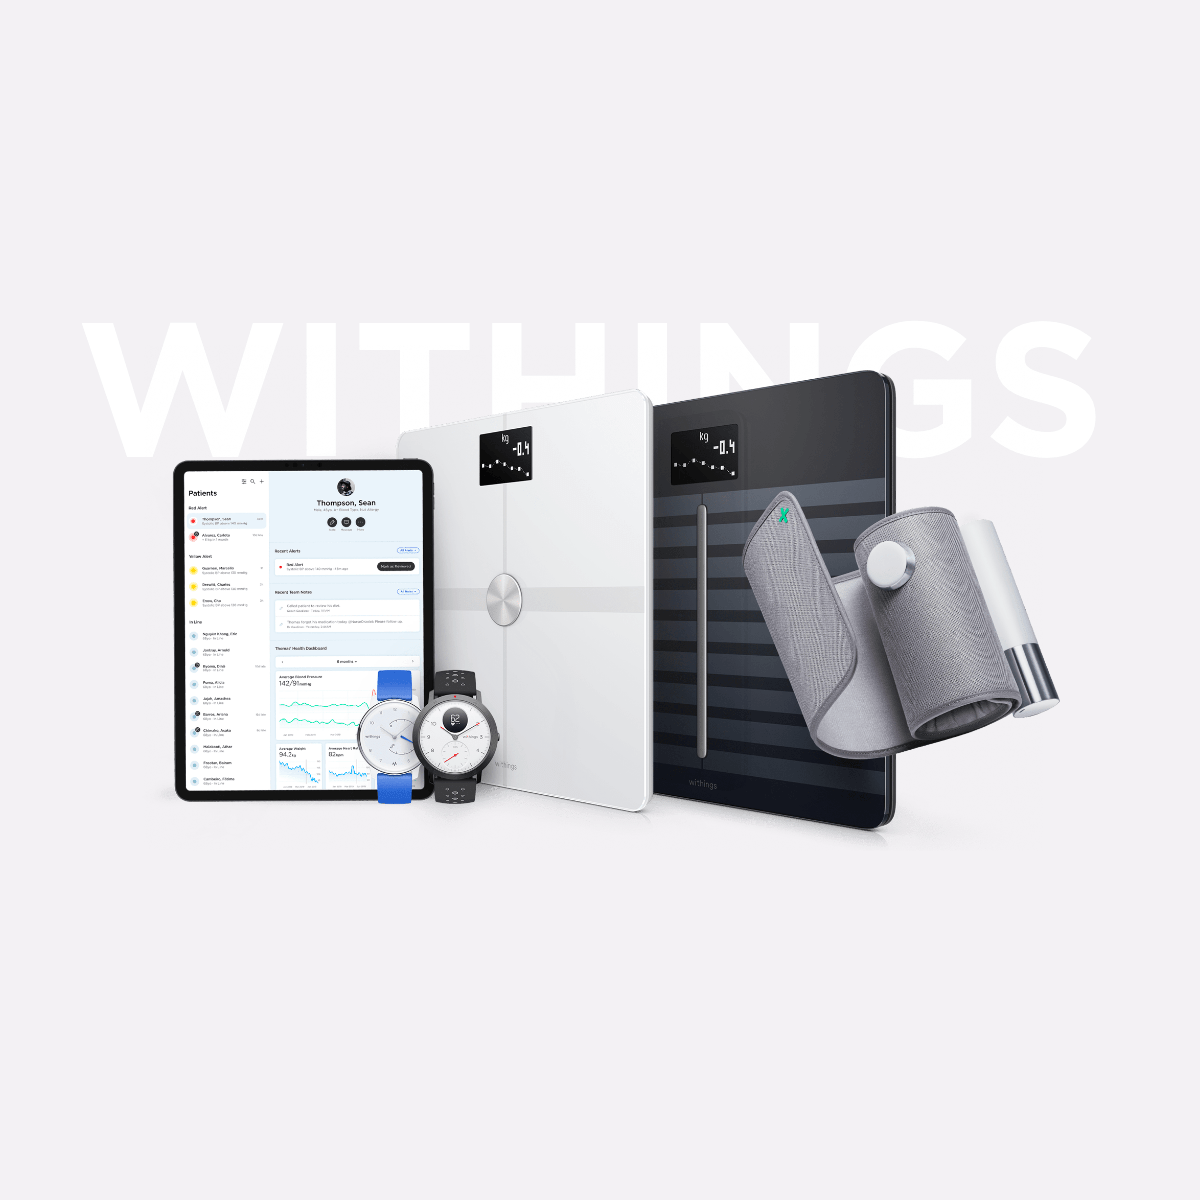 https://www-assets.withings.com/site/media/opengraph/newOG/withings.png